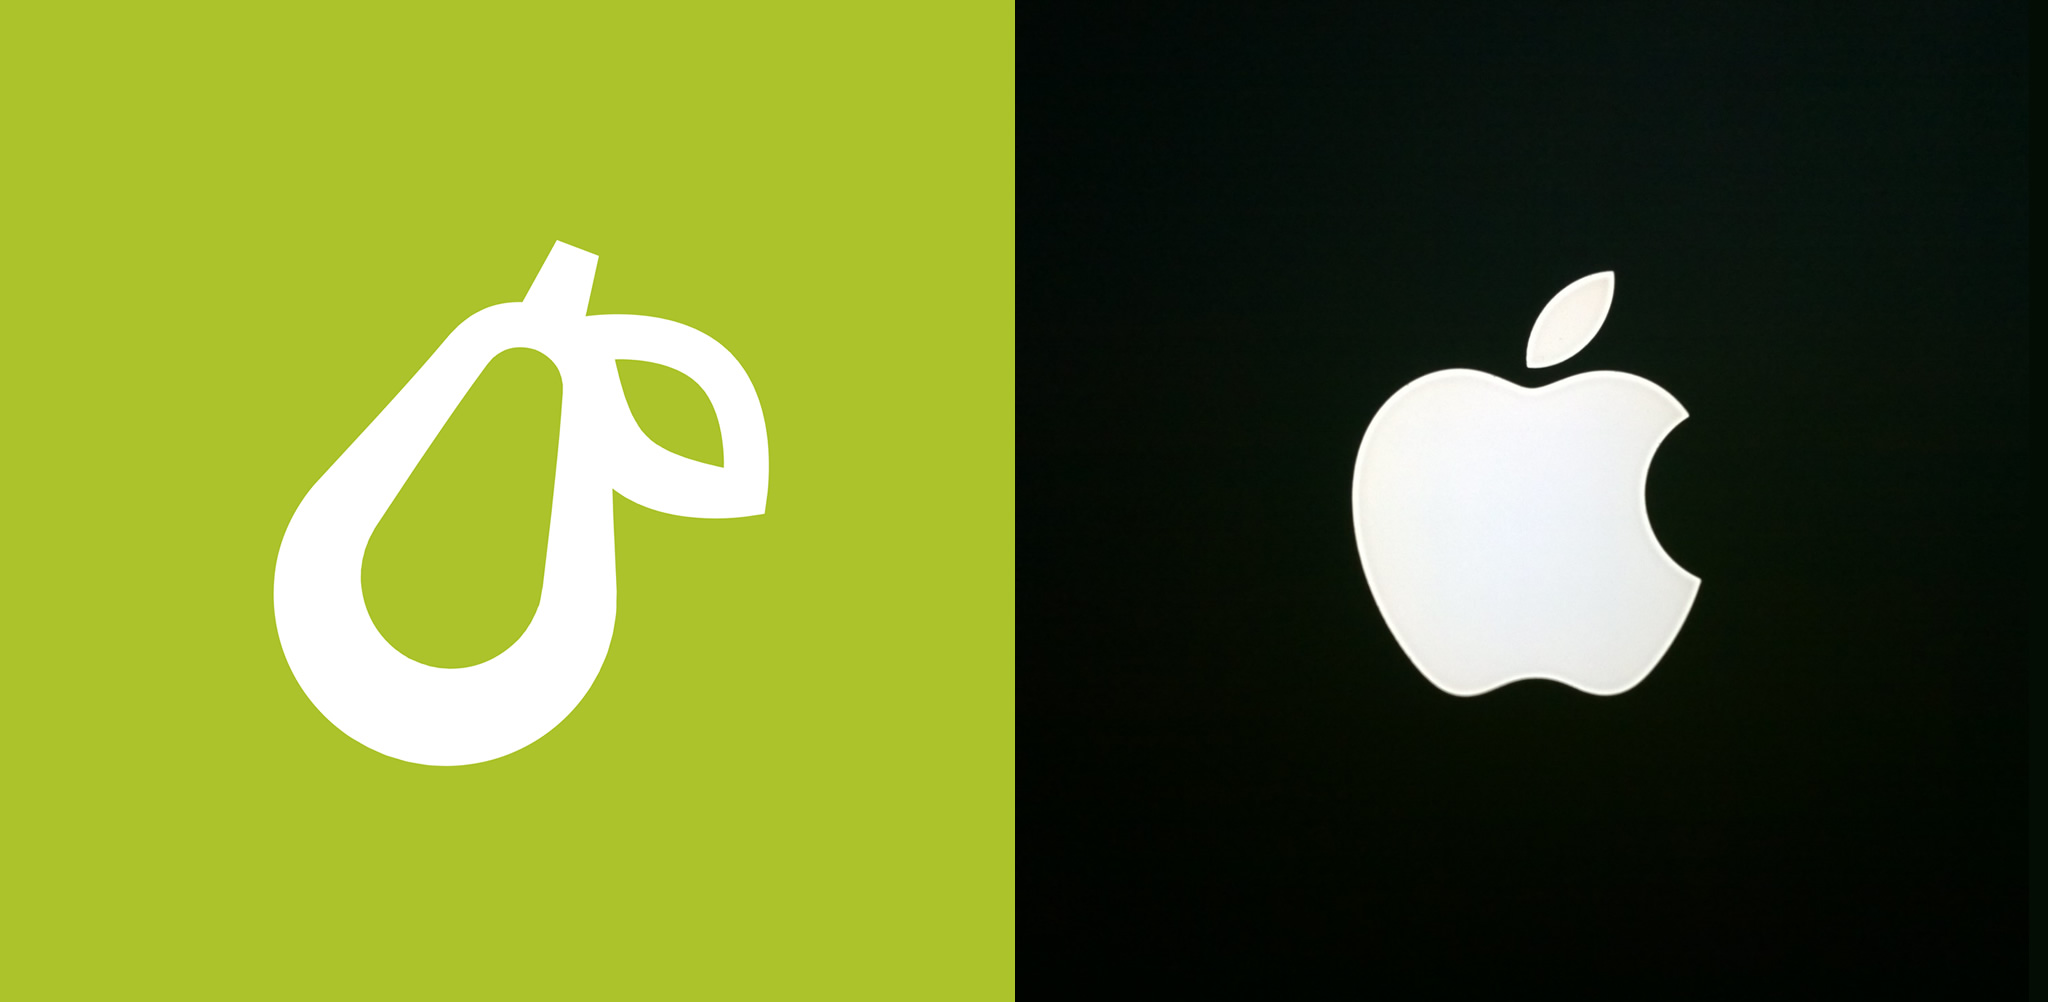 Apple is 'bullying' small developer Prepear for using a pear in its logo